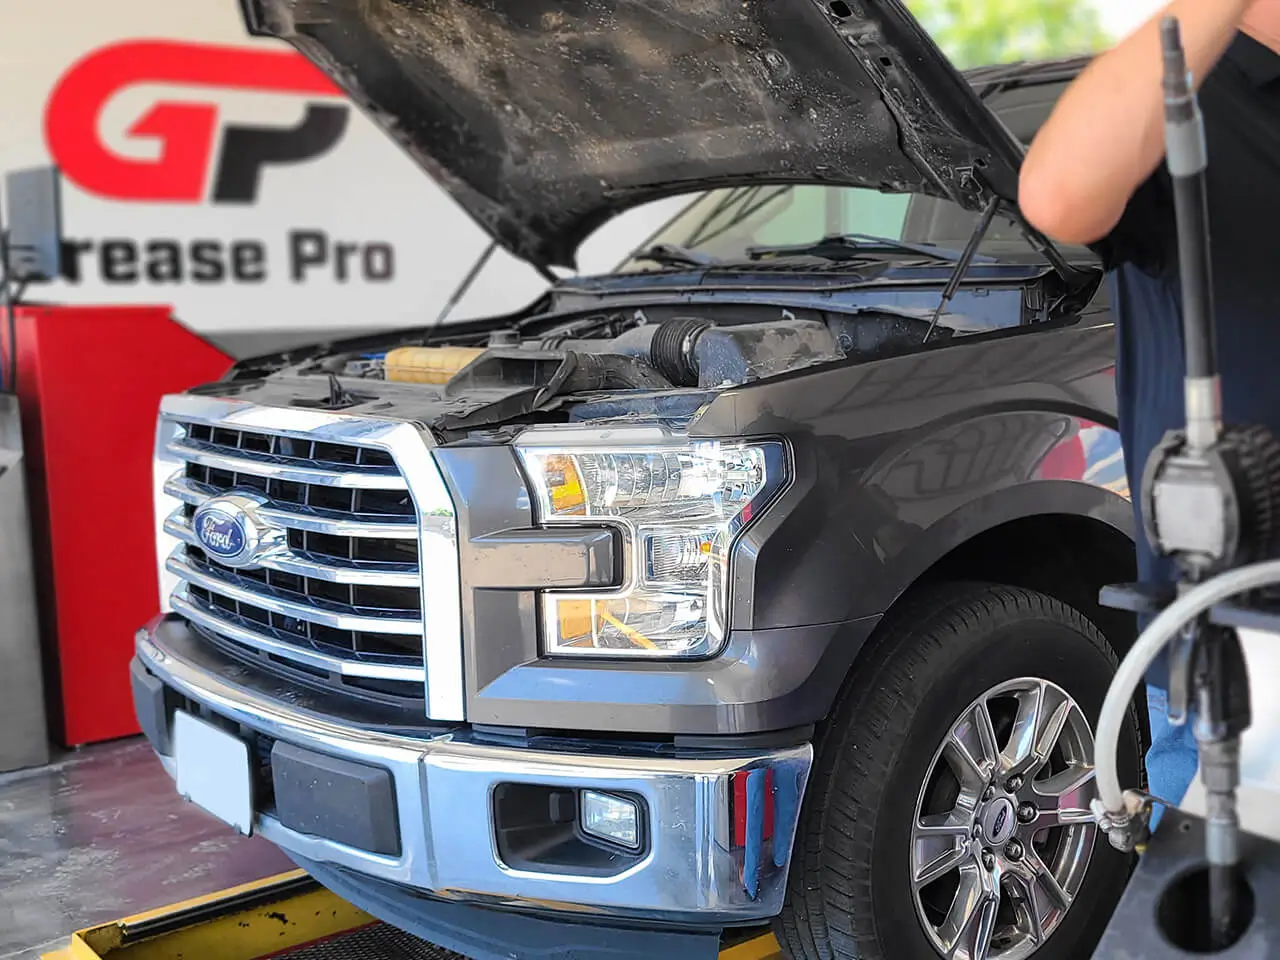 Grease Pro Auto Repair Services - Truck shown parked over service pit with hood open for service